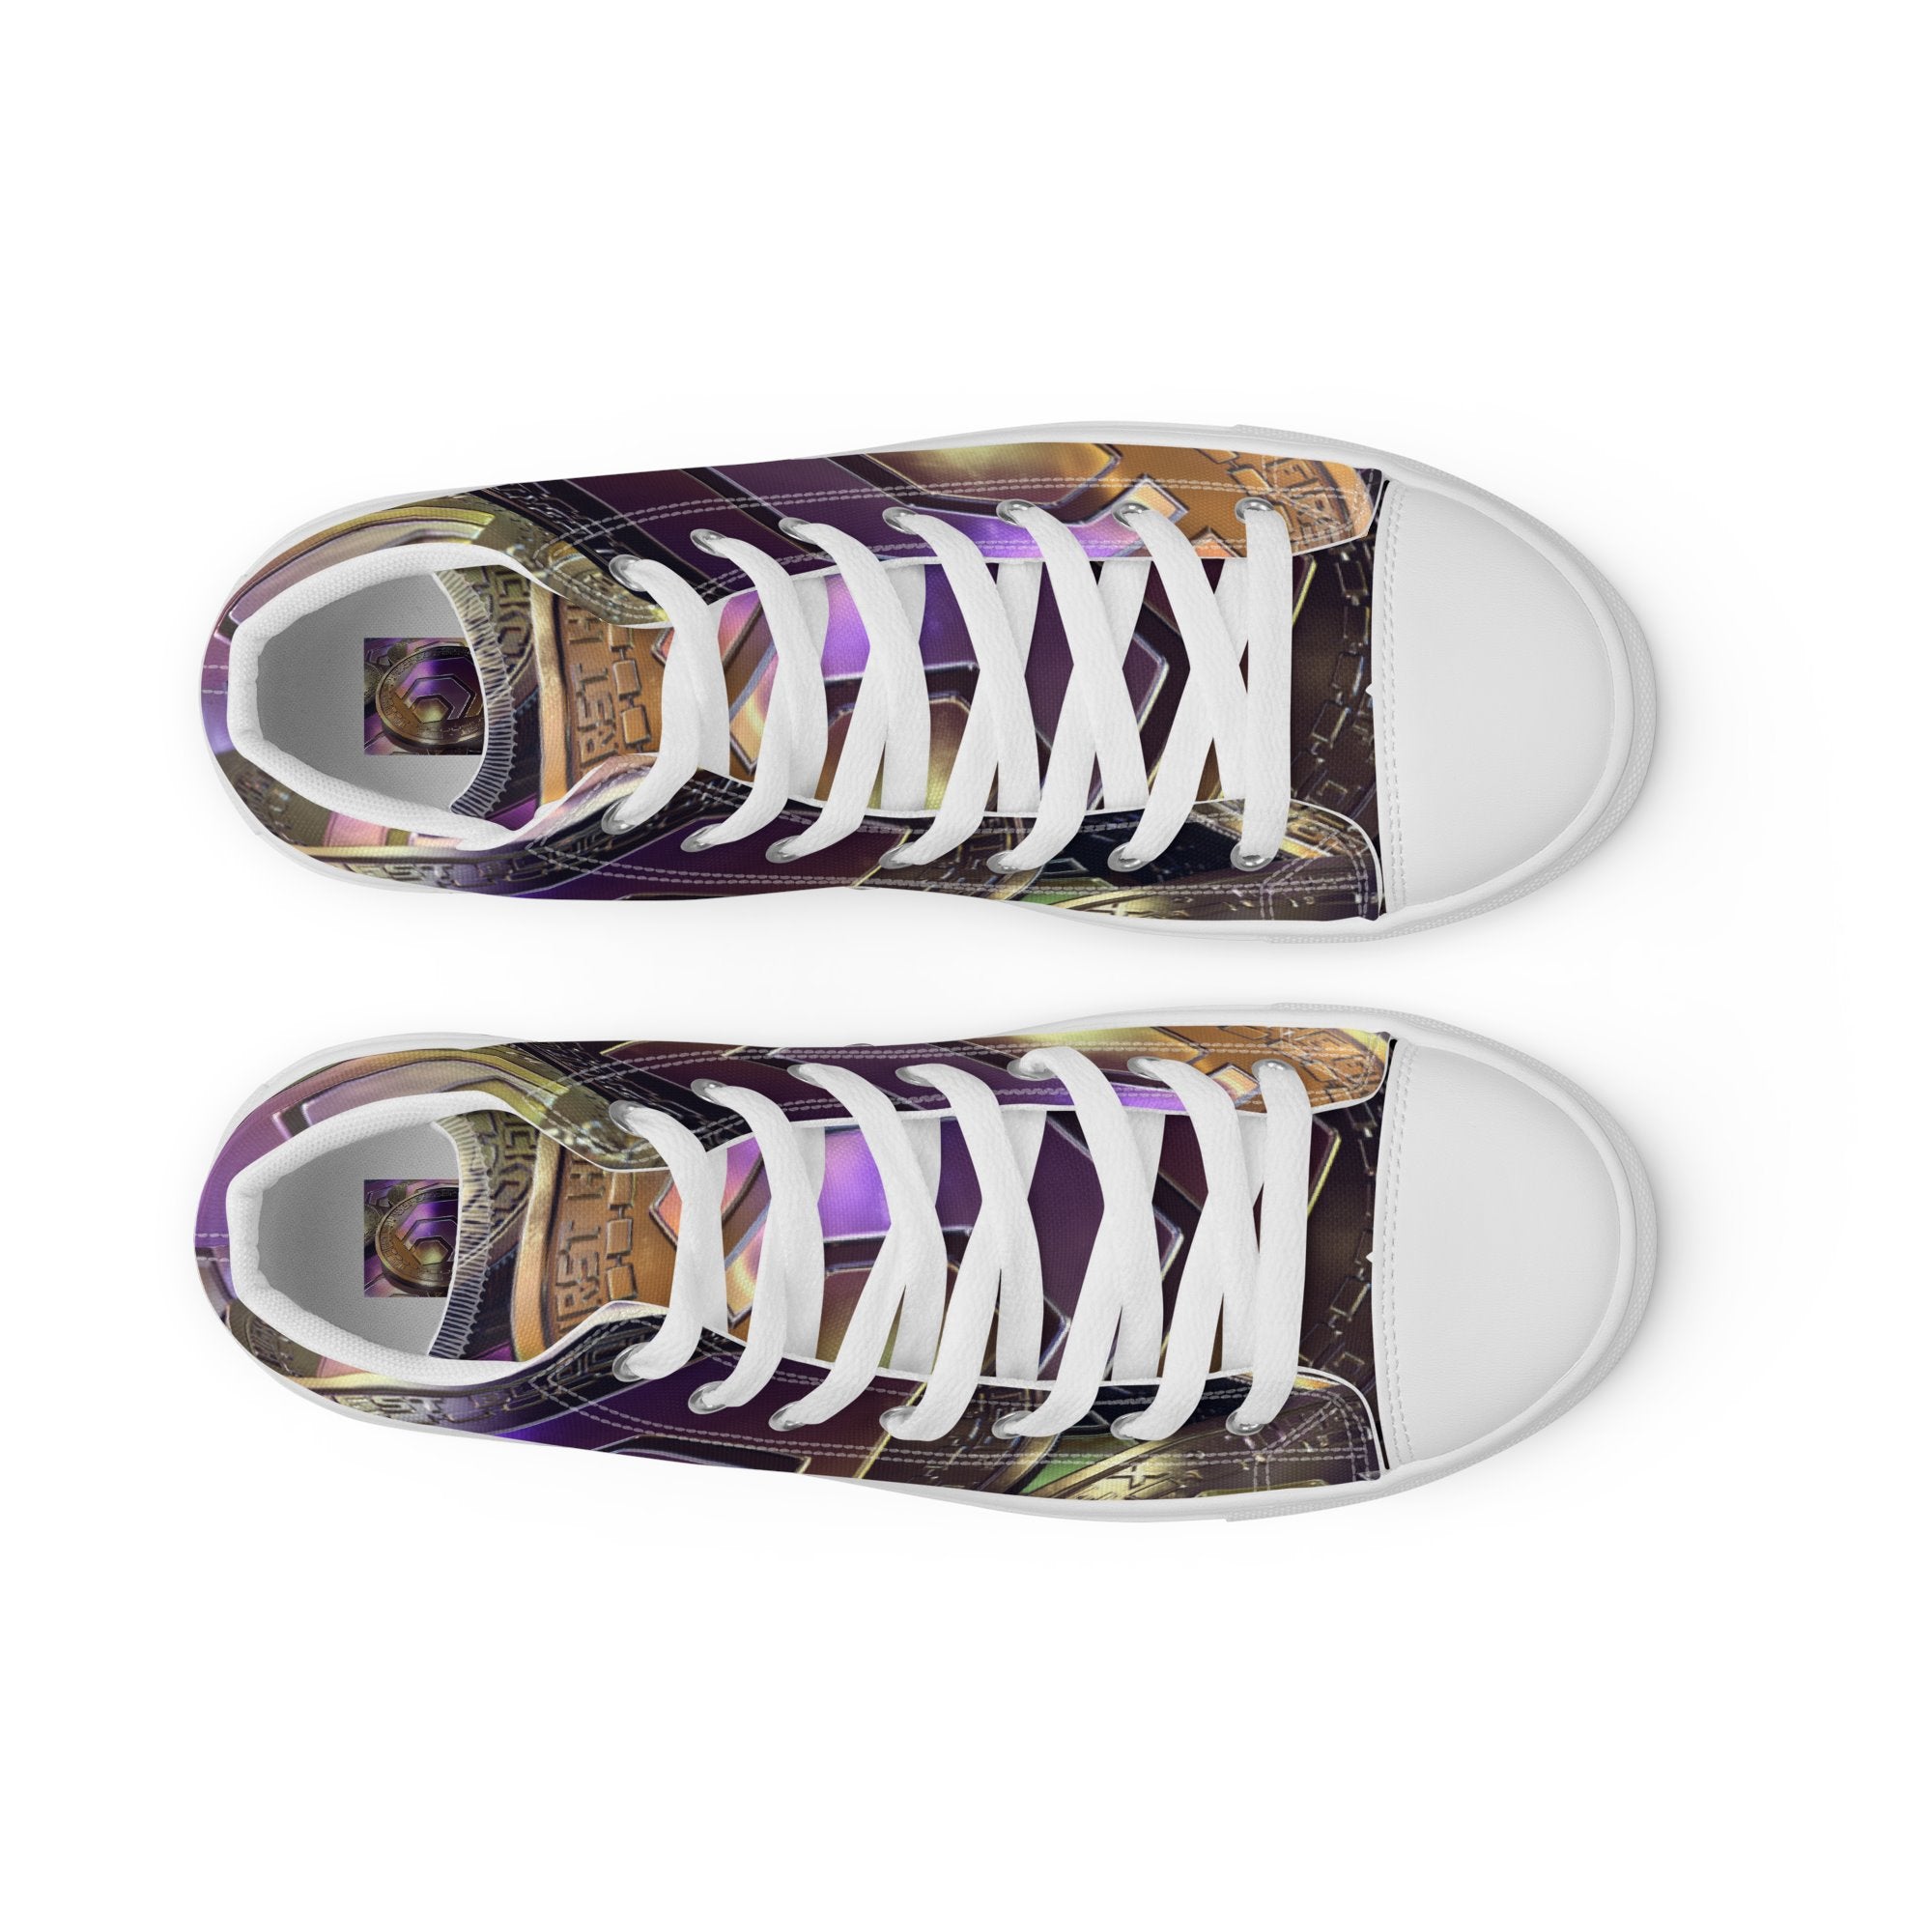 HEX High Top Canvas Shoes - Men’s on The Good Shop Online Store